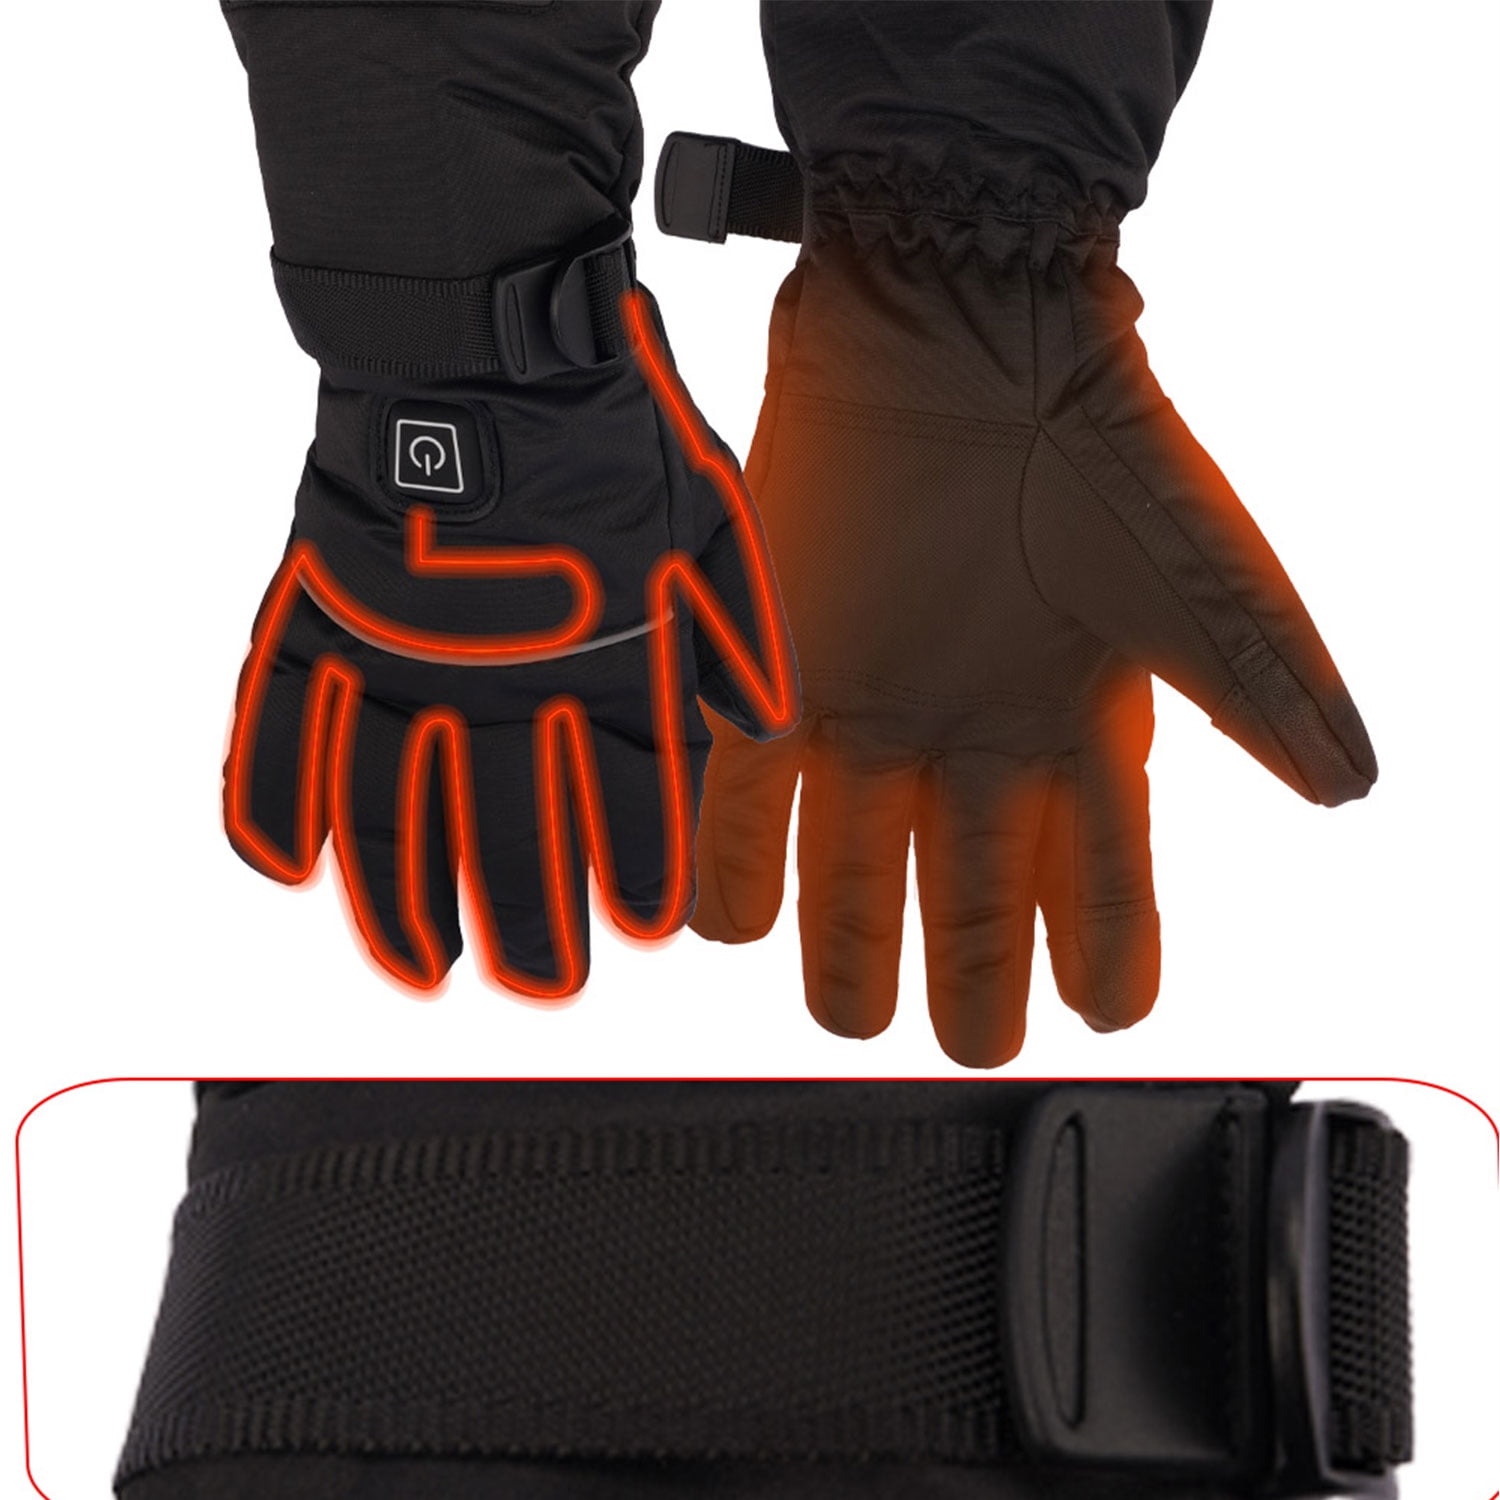 Rtmgob Unisex Heated Gloves, USB Rechargeable Touchscreen Heated